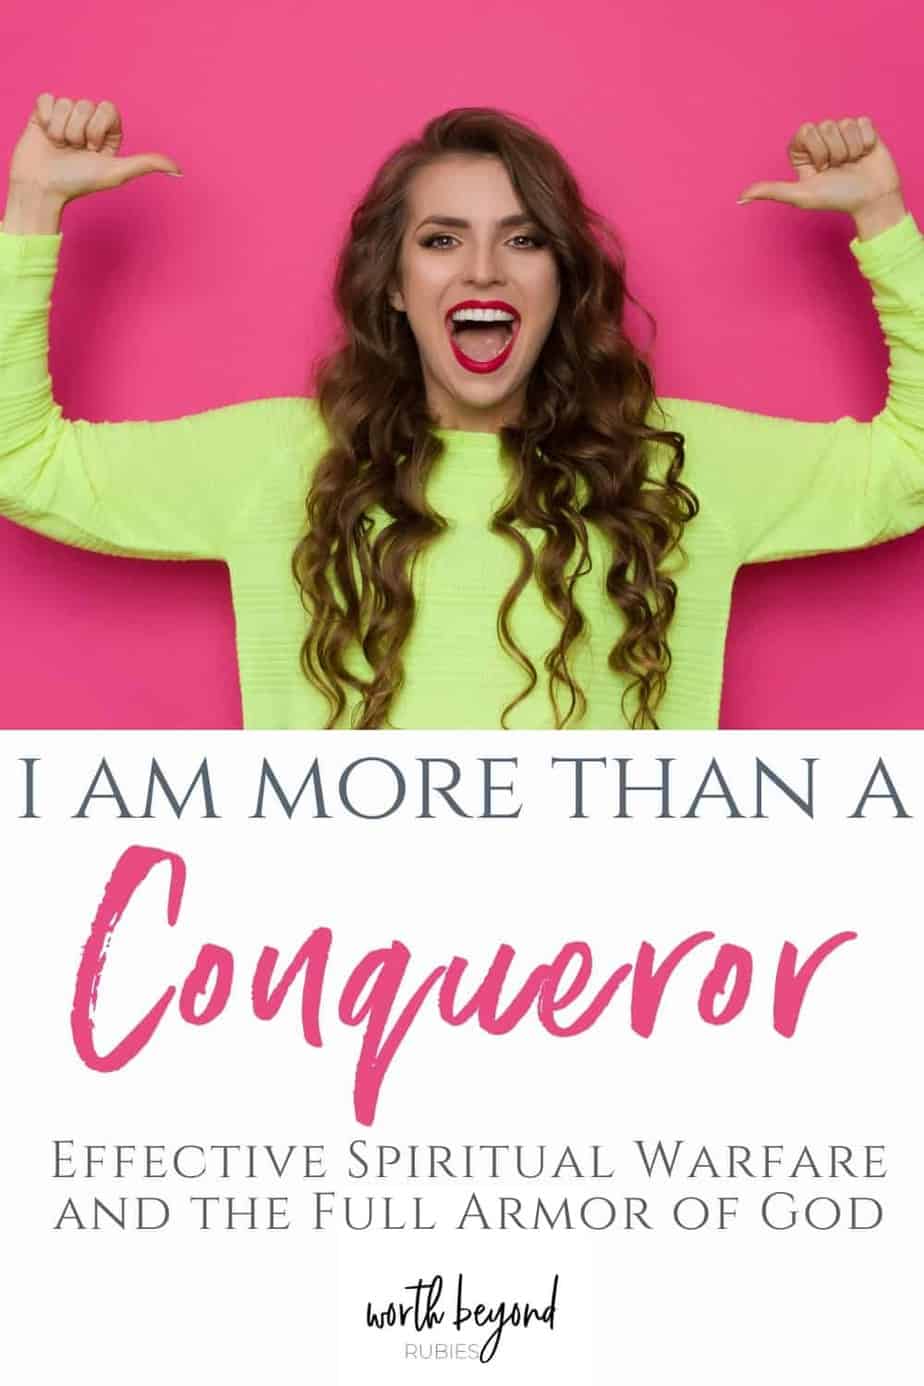 an image of a woman with long brown hair in a lime green shirt with both arms up and her thumbs pointing at her head, her mouth open in a smile, against a bright pink background and text below that says I am More Than a Conqueror - Effective Spiritual Warfare and the Full Armor of God